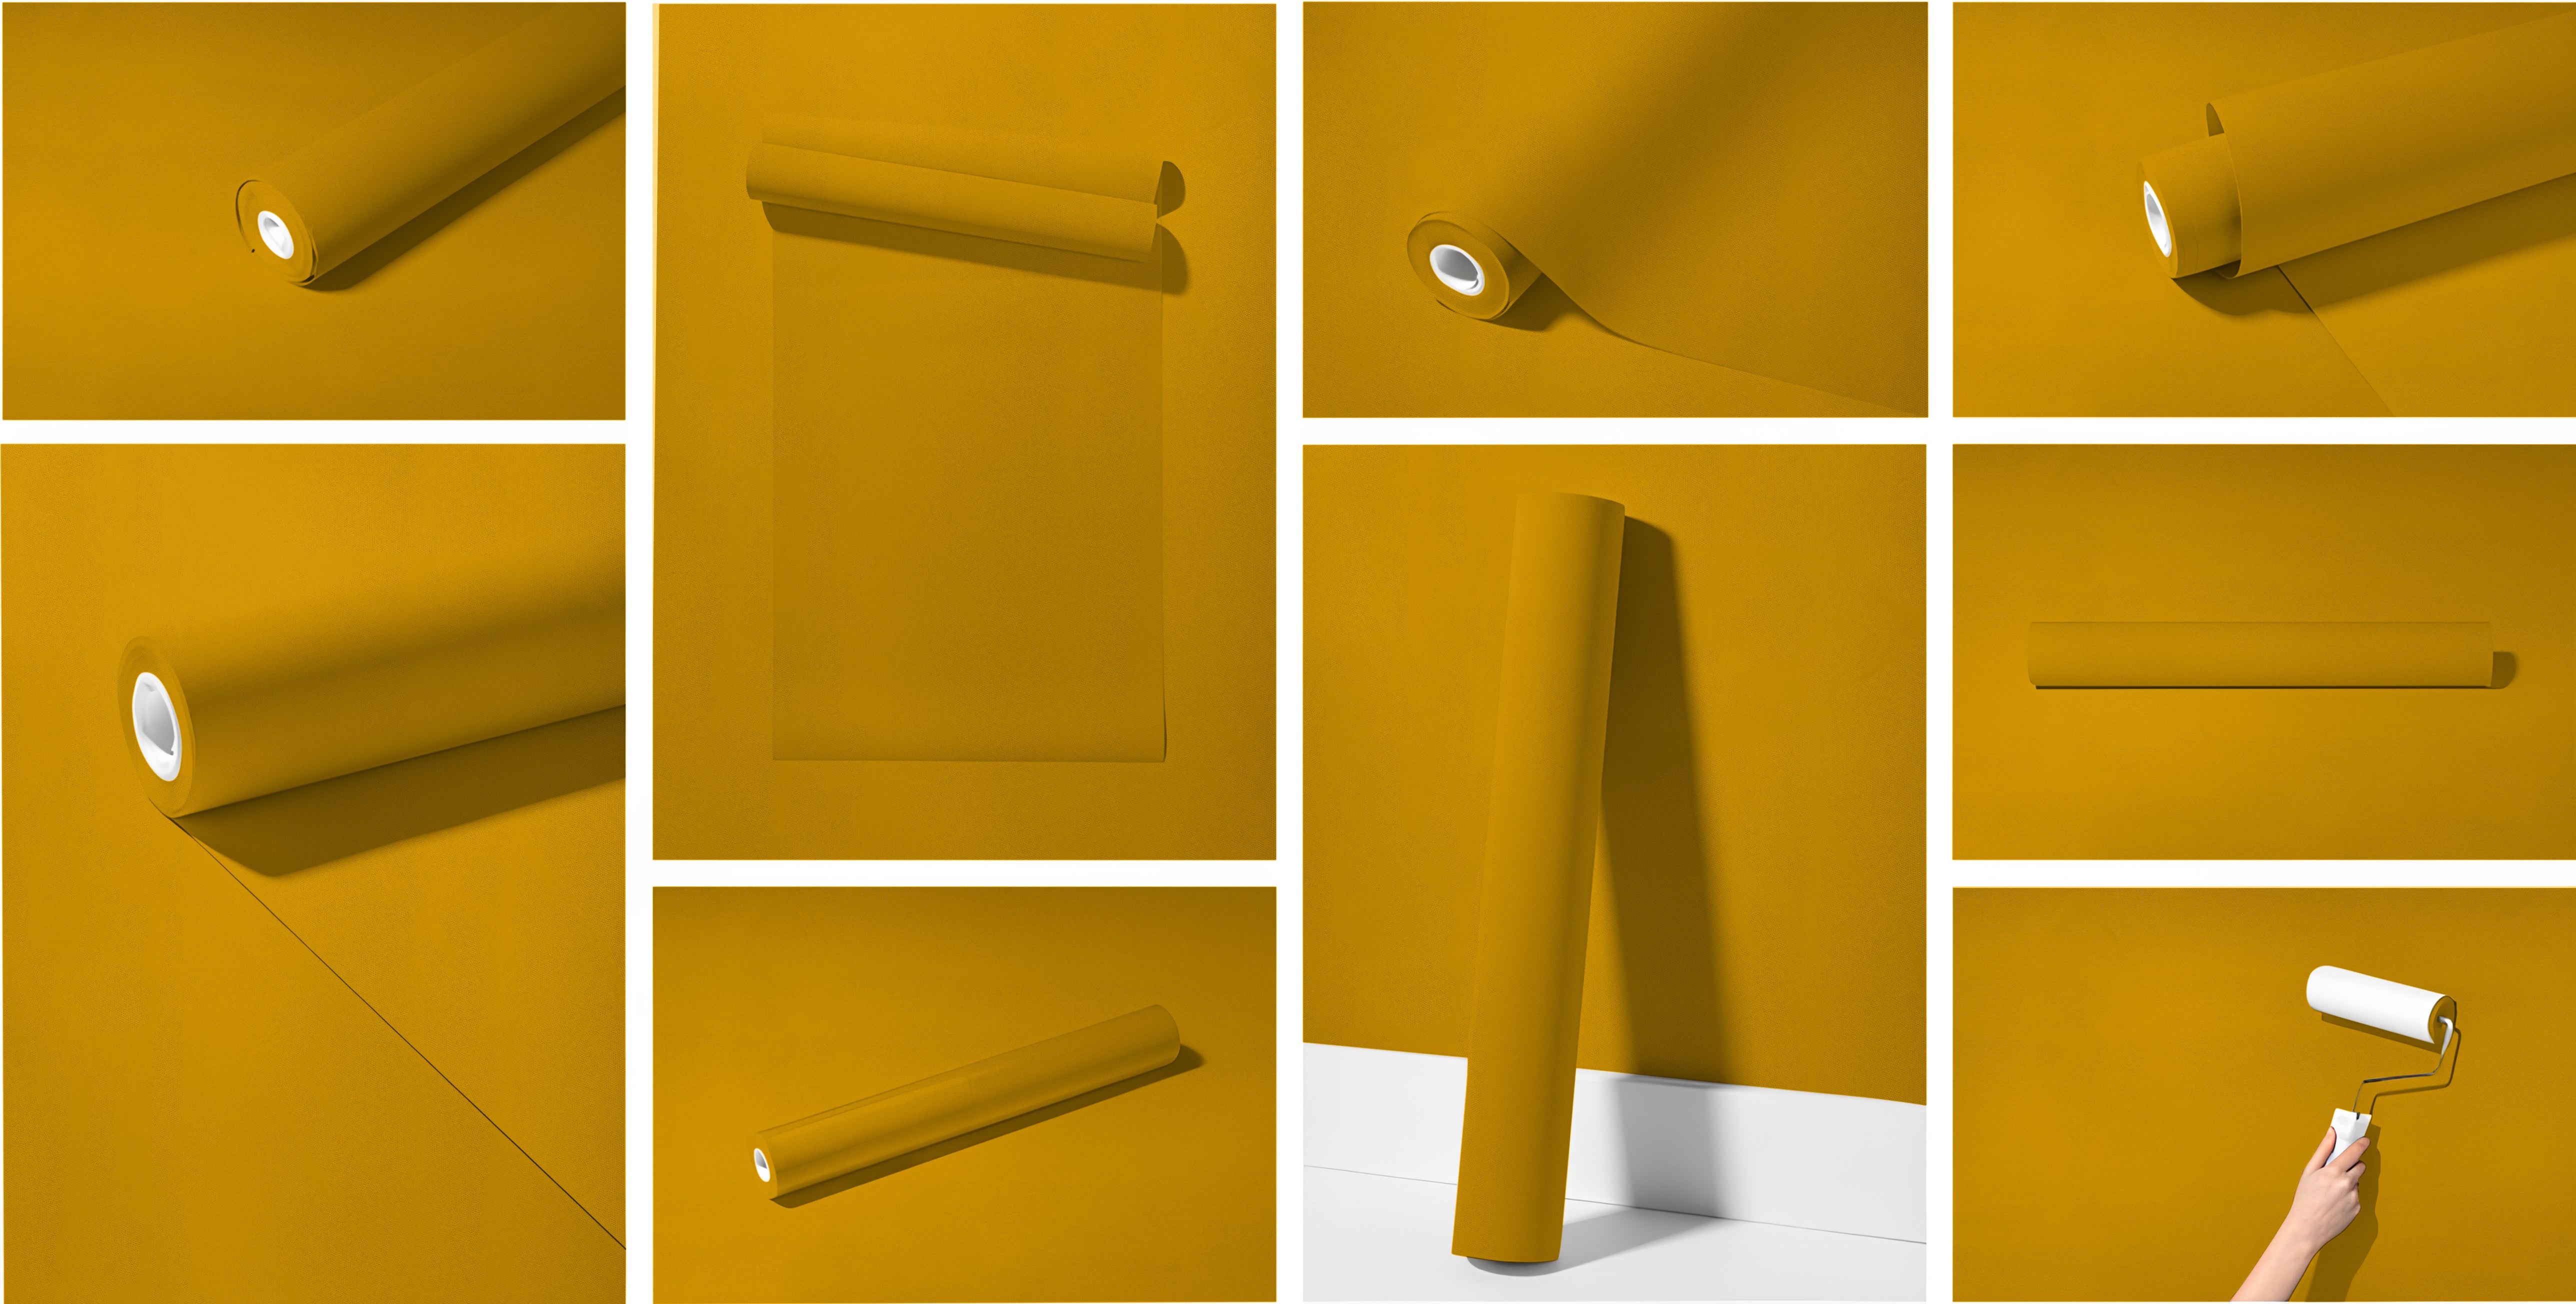 Peel & Stick Removable Re-usable Paint - Color RAL 1005 Honey Yellow - offRAL™ - RALRAW LLC, USA